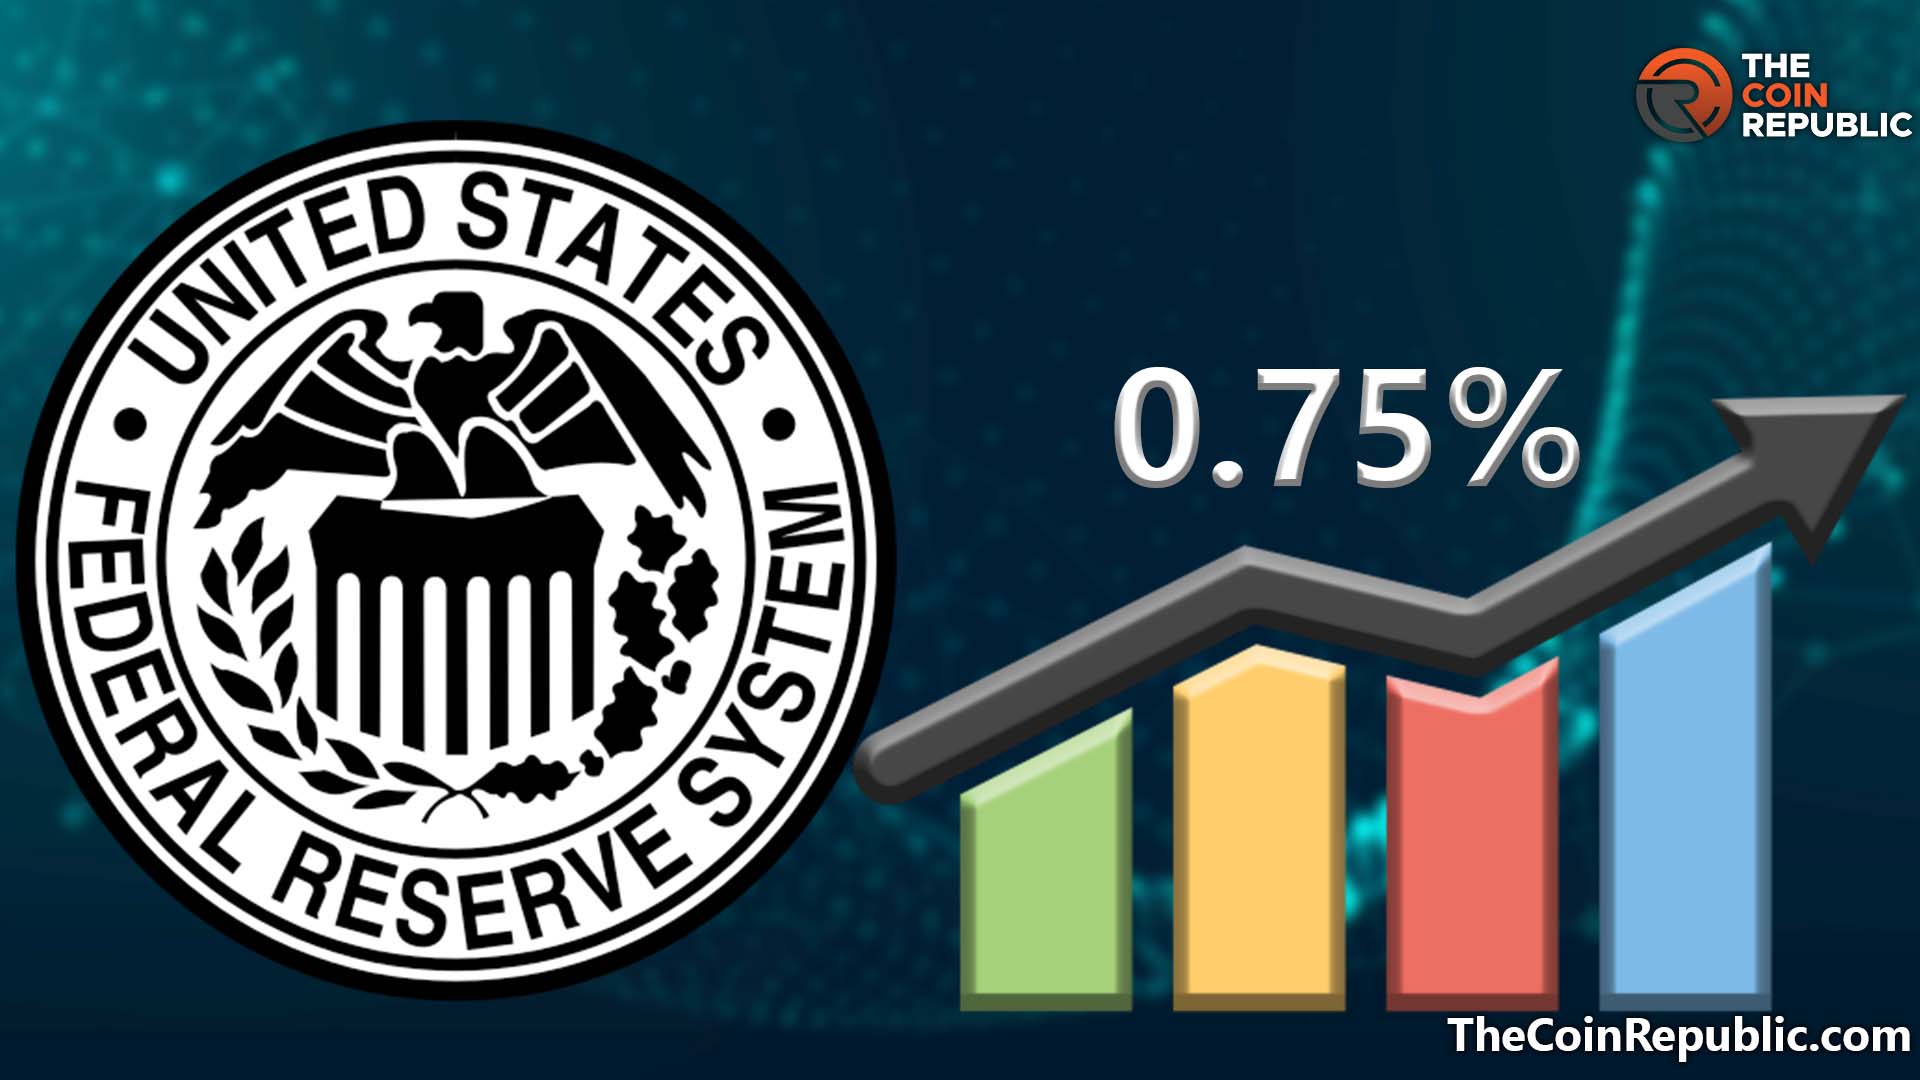 Federal Reserve Provides Relief in December Rate Hike